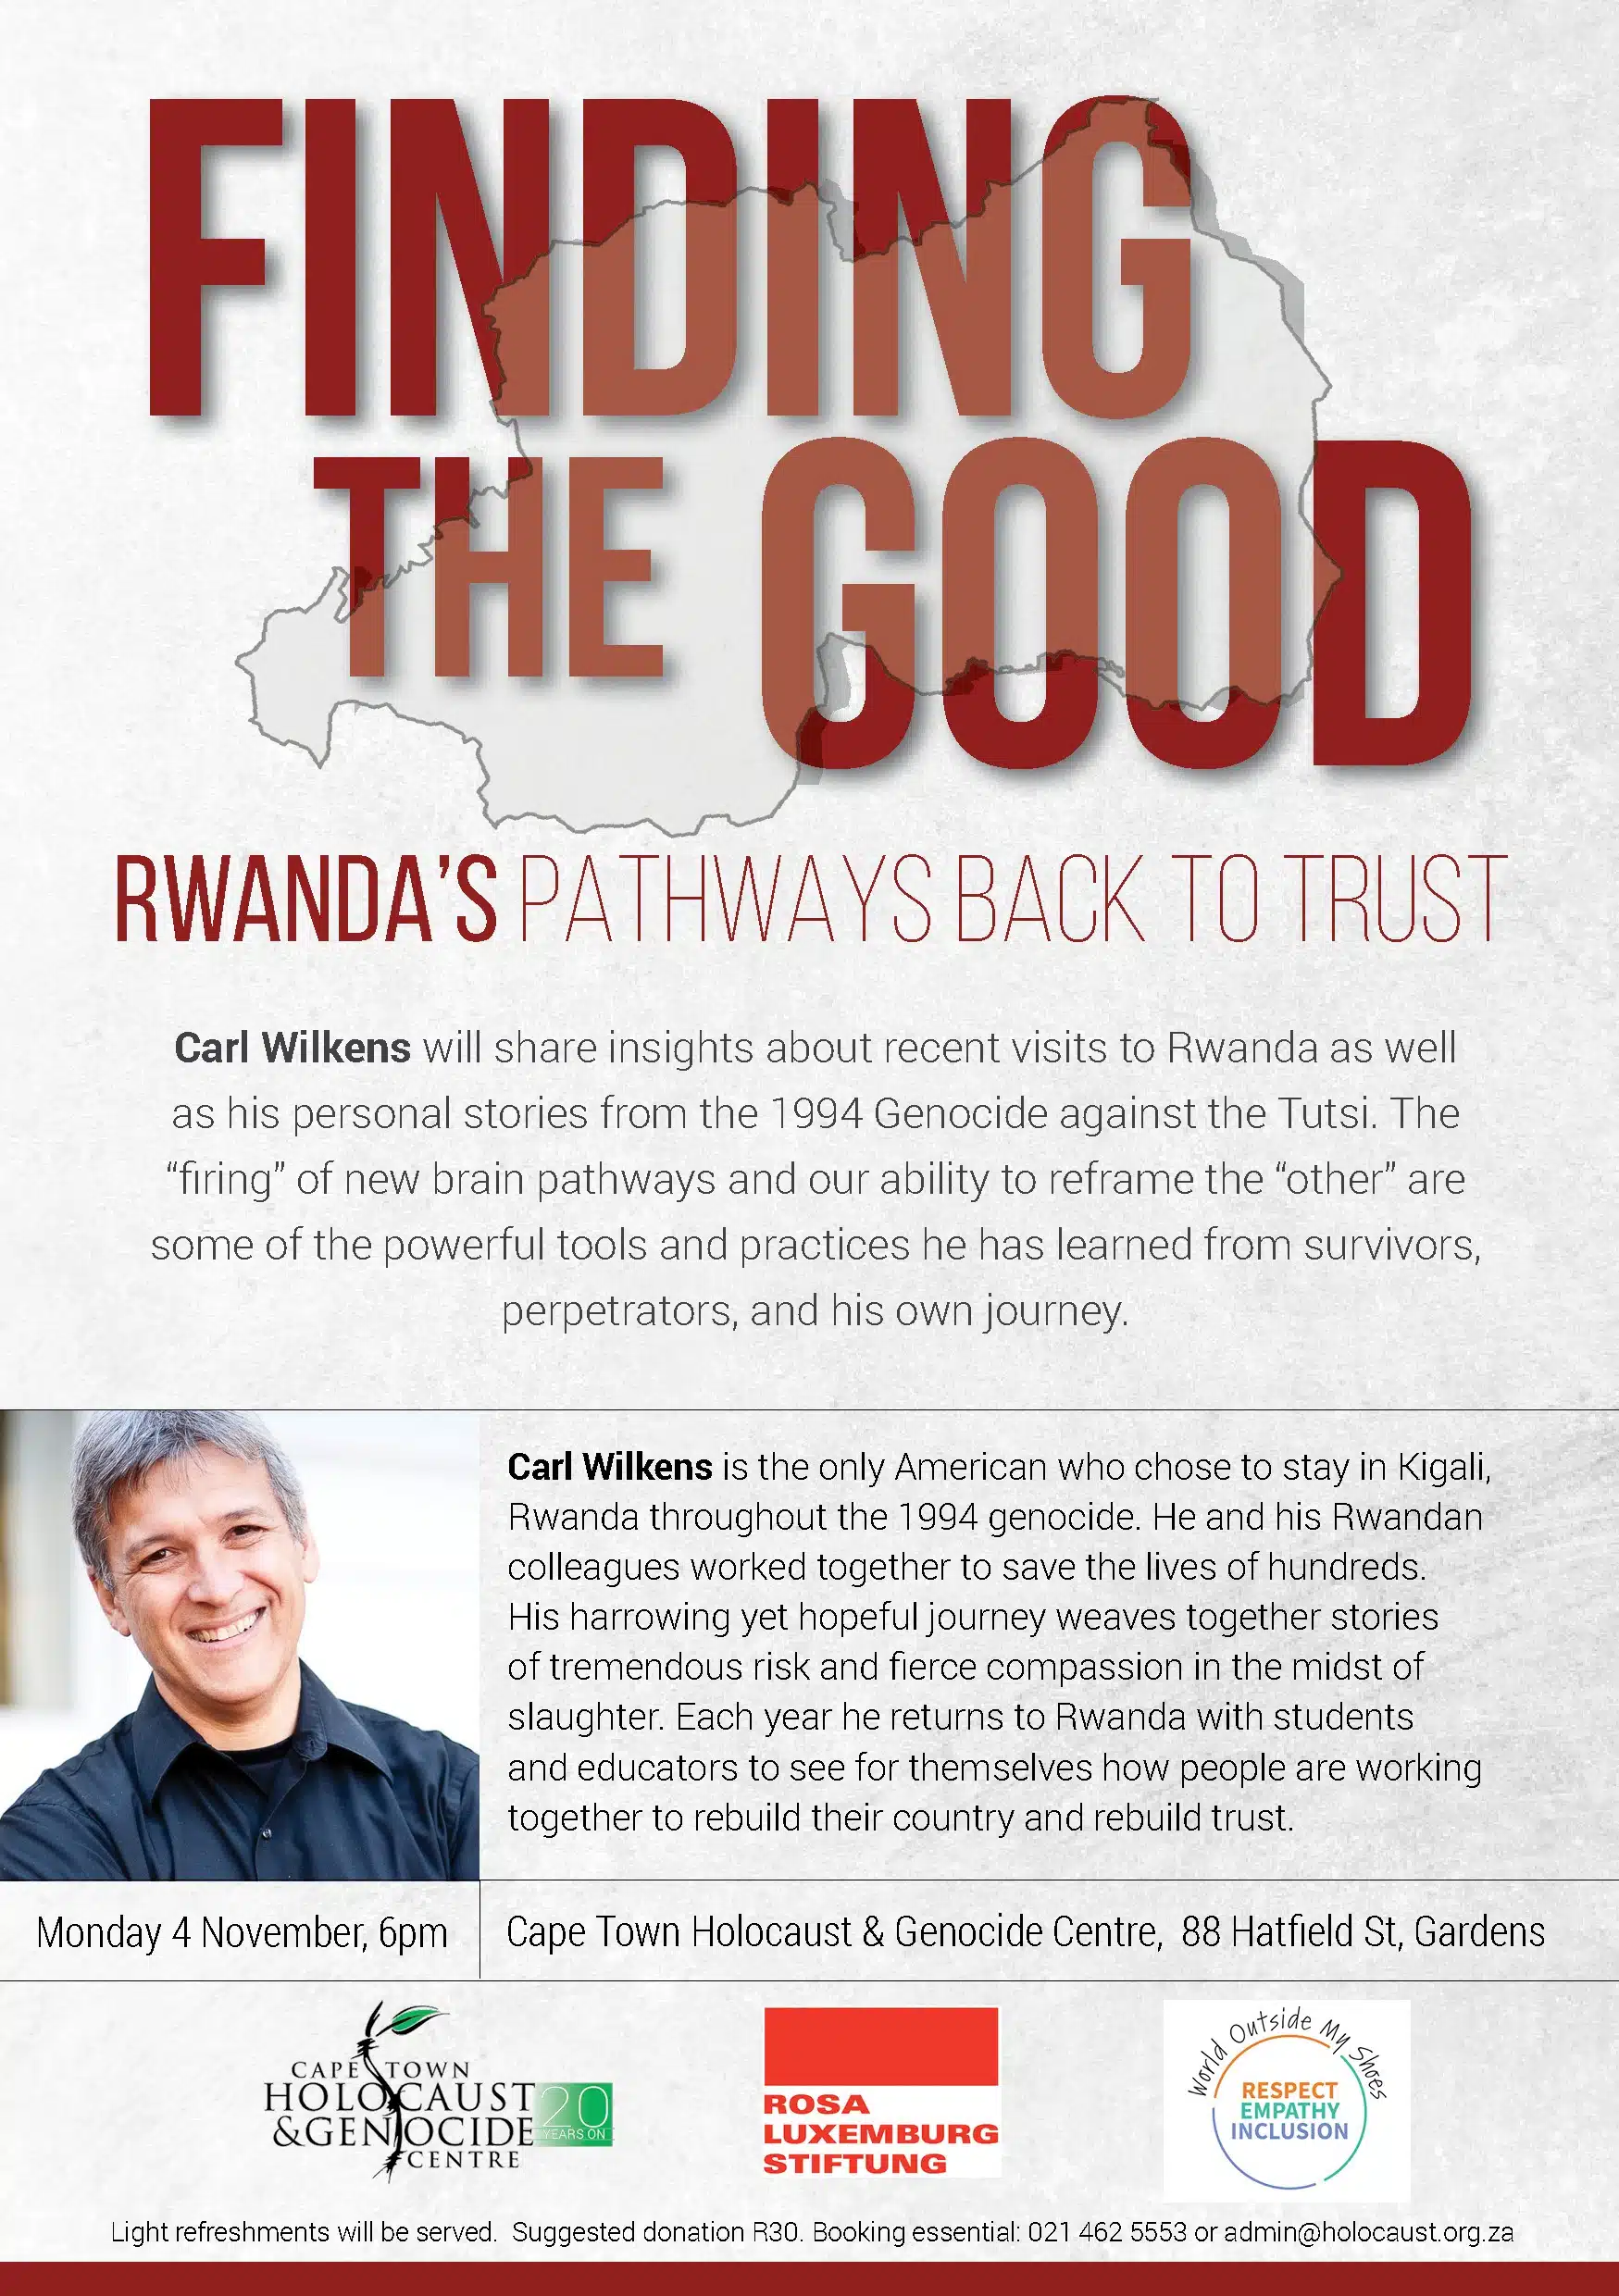 Finding the Good-Rwanda’s Pathways Back to Trust by Carl-Wilkens CTHGC